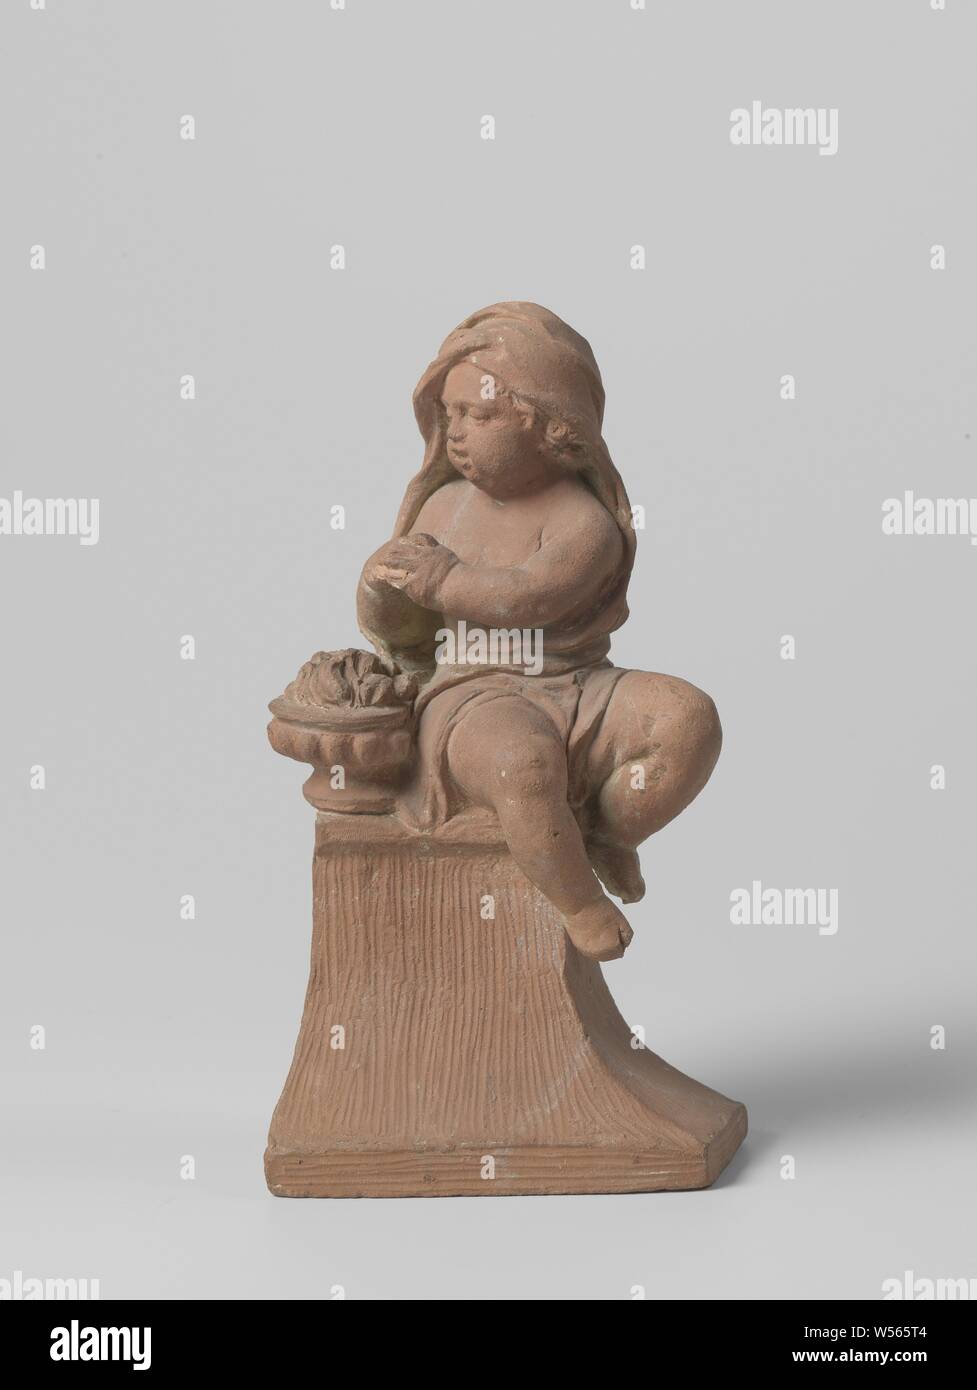 Season, presented by child with attribute, Northern Netherlands, 1725 - 1740, terracotta (clay material), h 19 cm × w 10.5 cm × d 7 cm Stock Photo